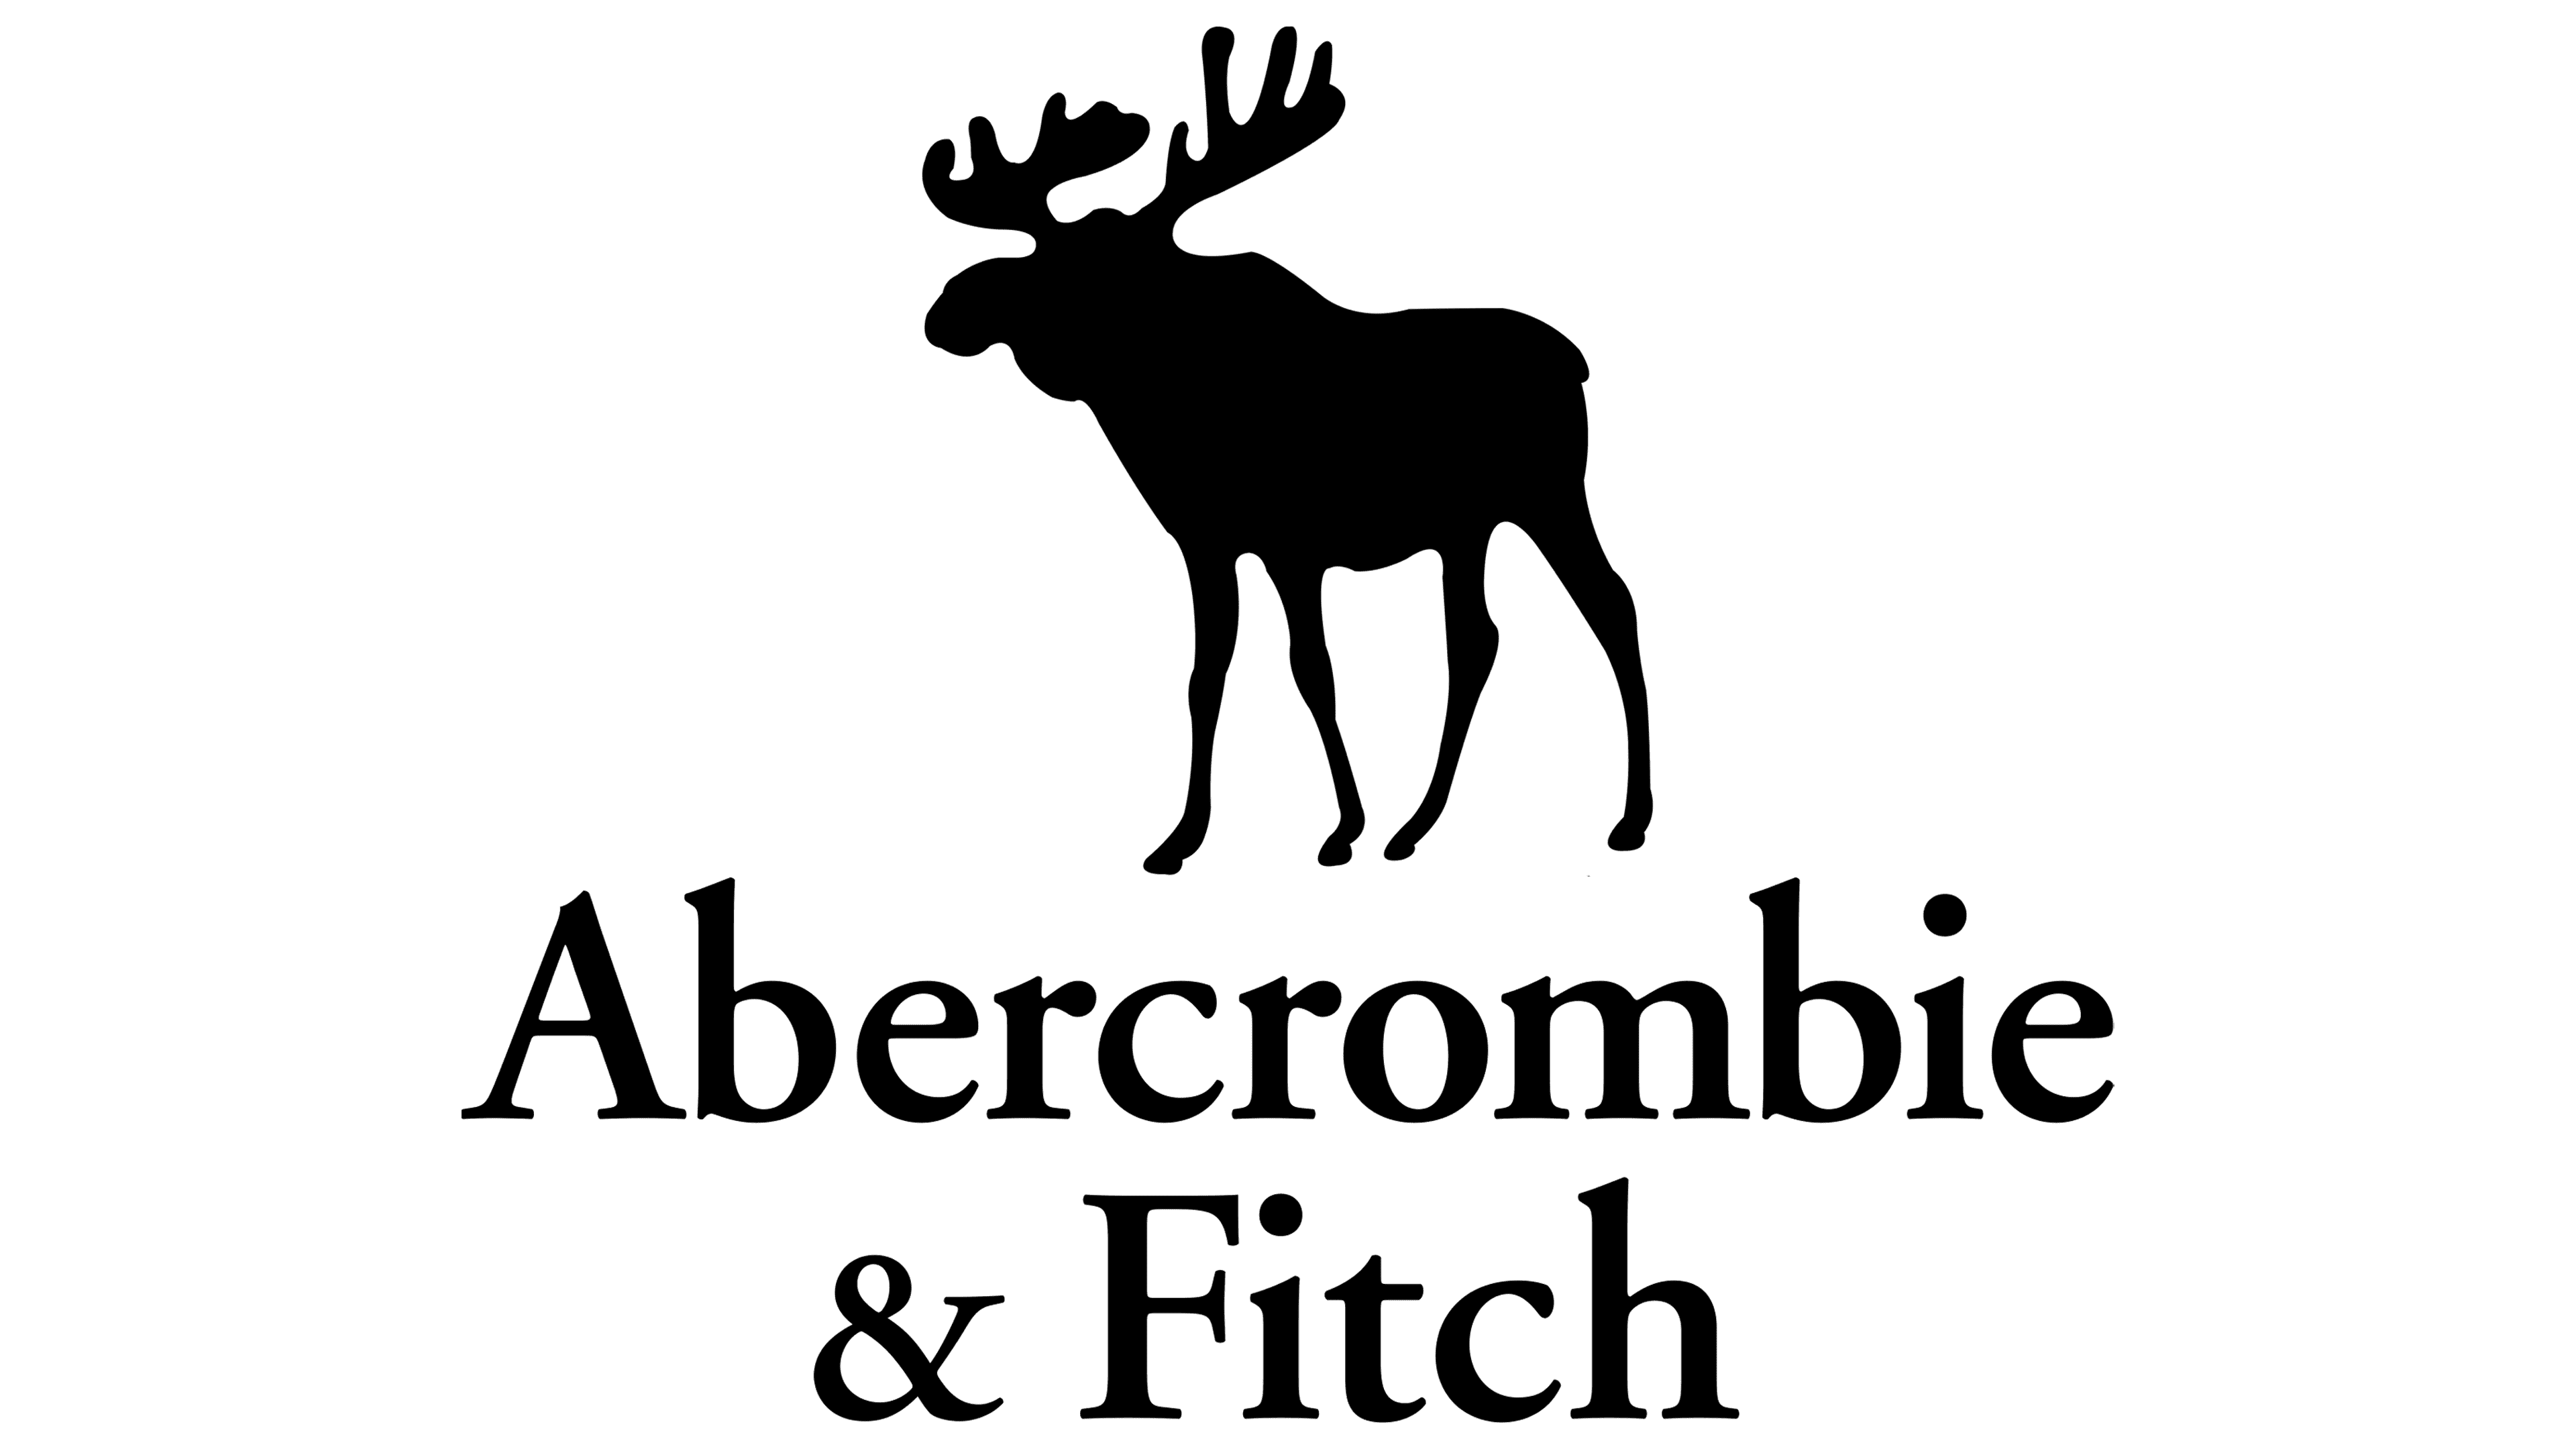 ABERCROMBIE & FITCH Limited Time - Up to 25% Off Select Styles + Free Shipping on Orders Over $99